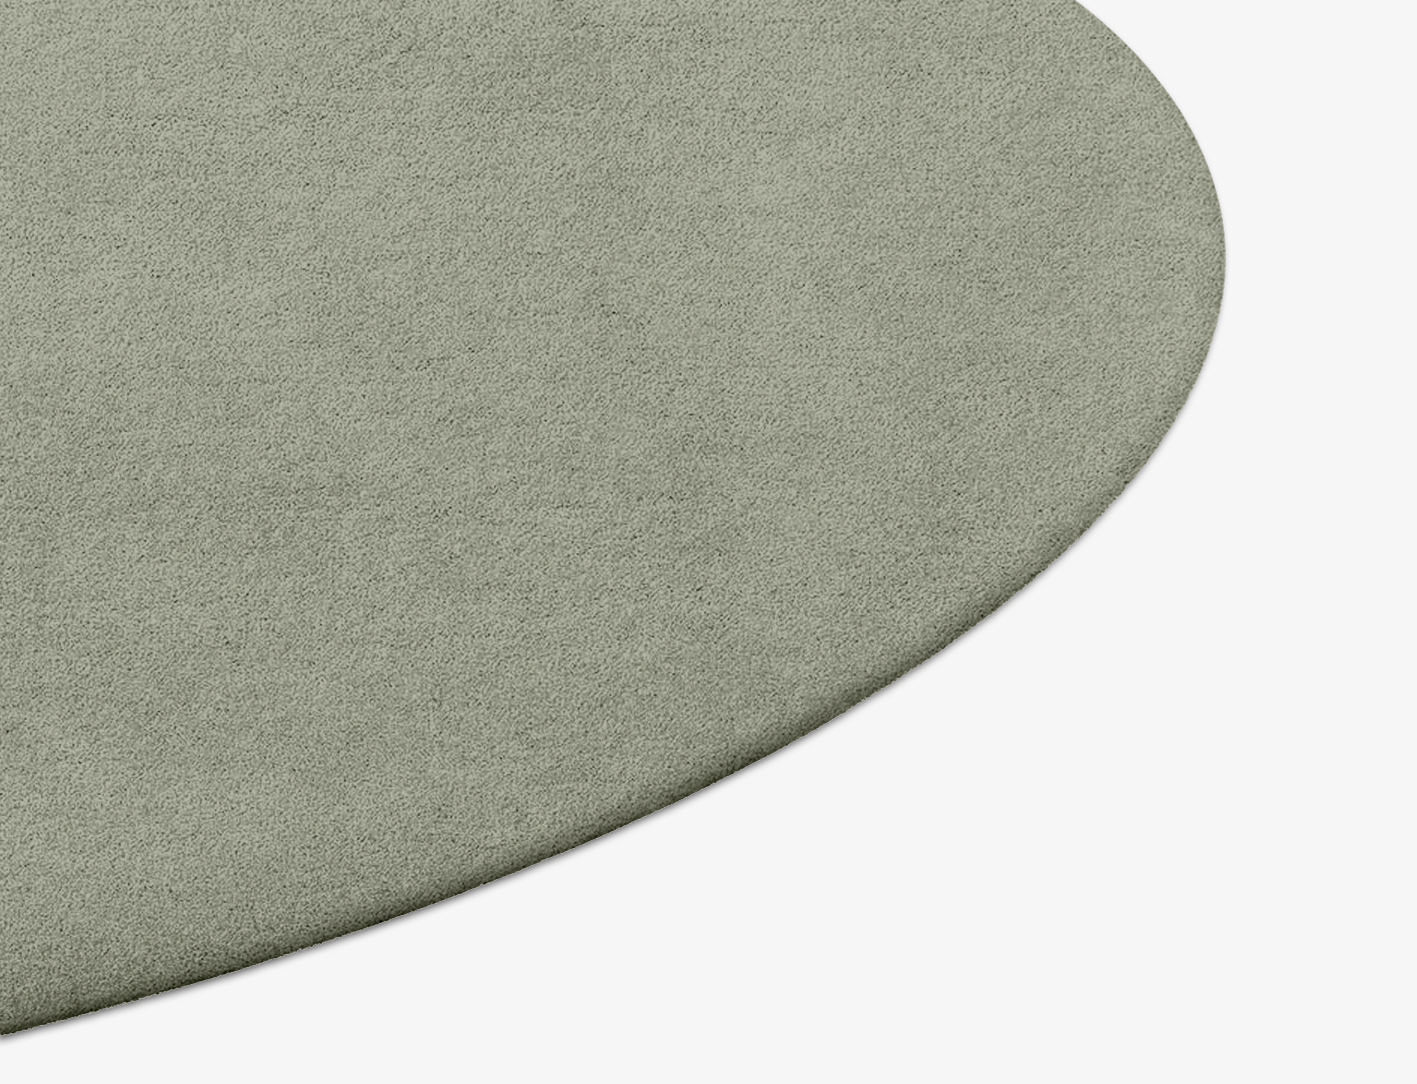 RA-CA11 Solid Colours Round Hand Tufted Pure Wool Custom Rug by Rug Artisan